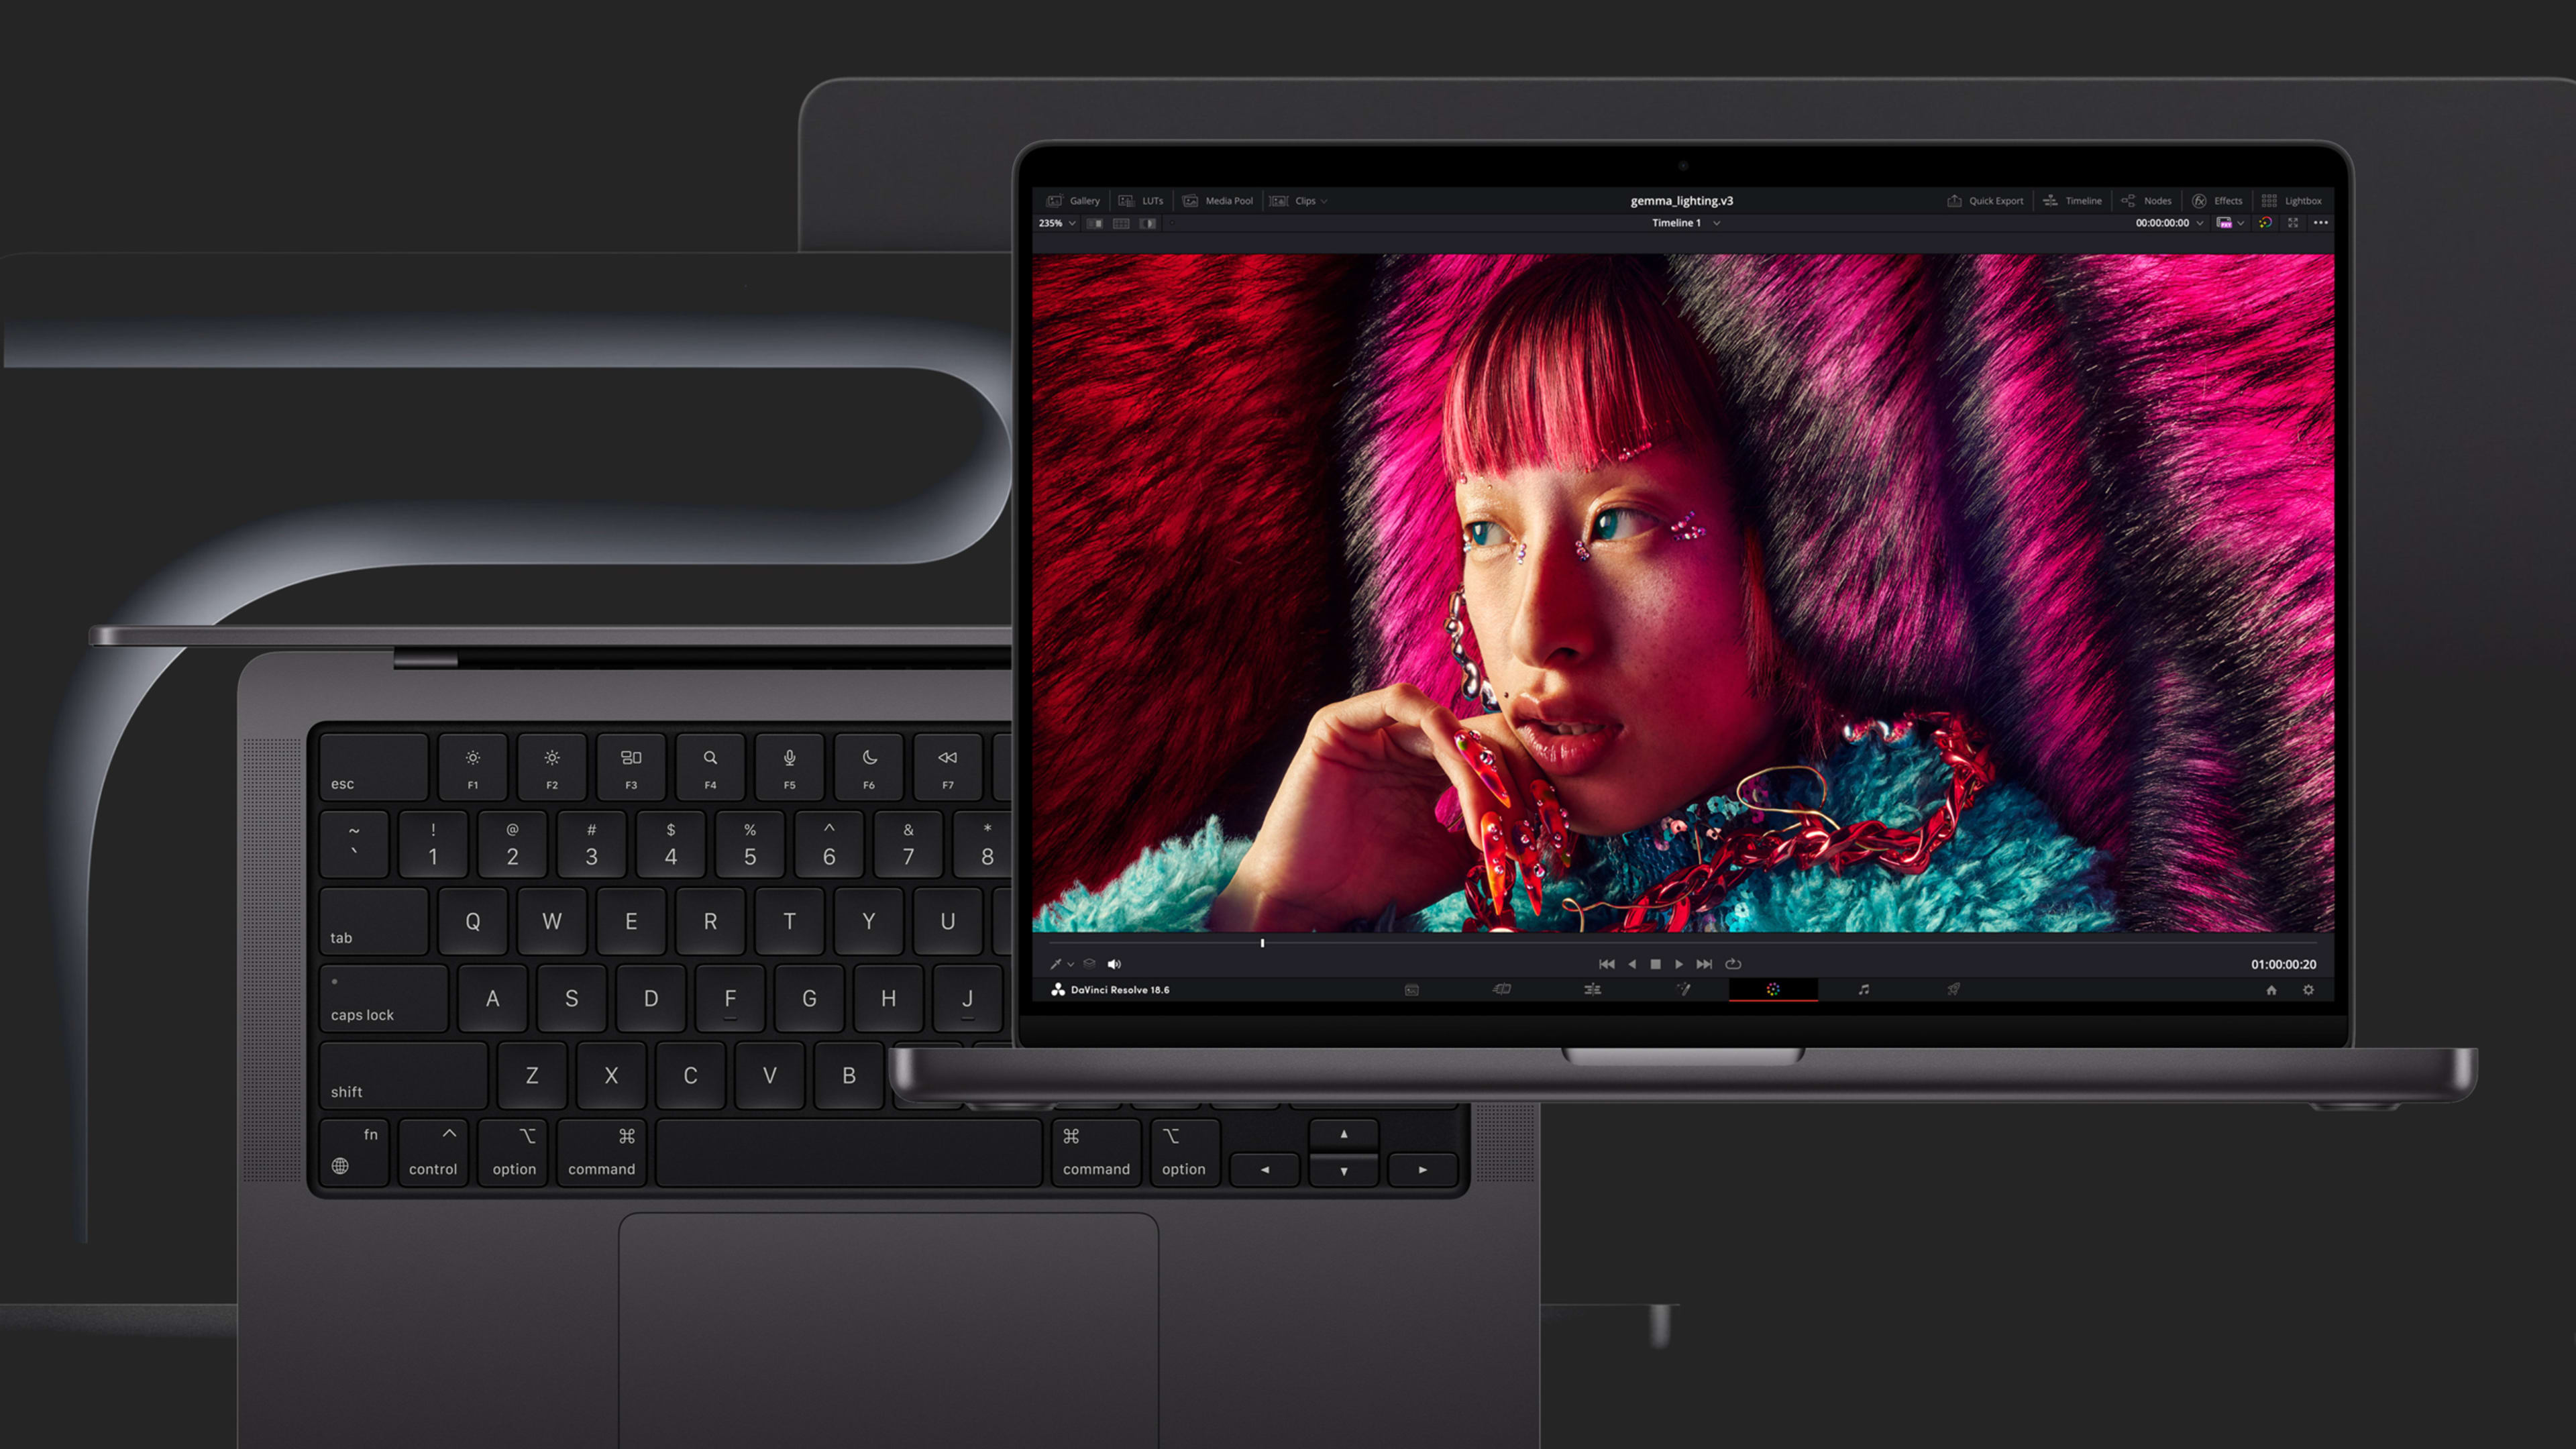 The new MacBook Pro makes so much sense. That’s no small feat